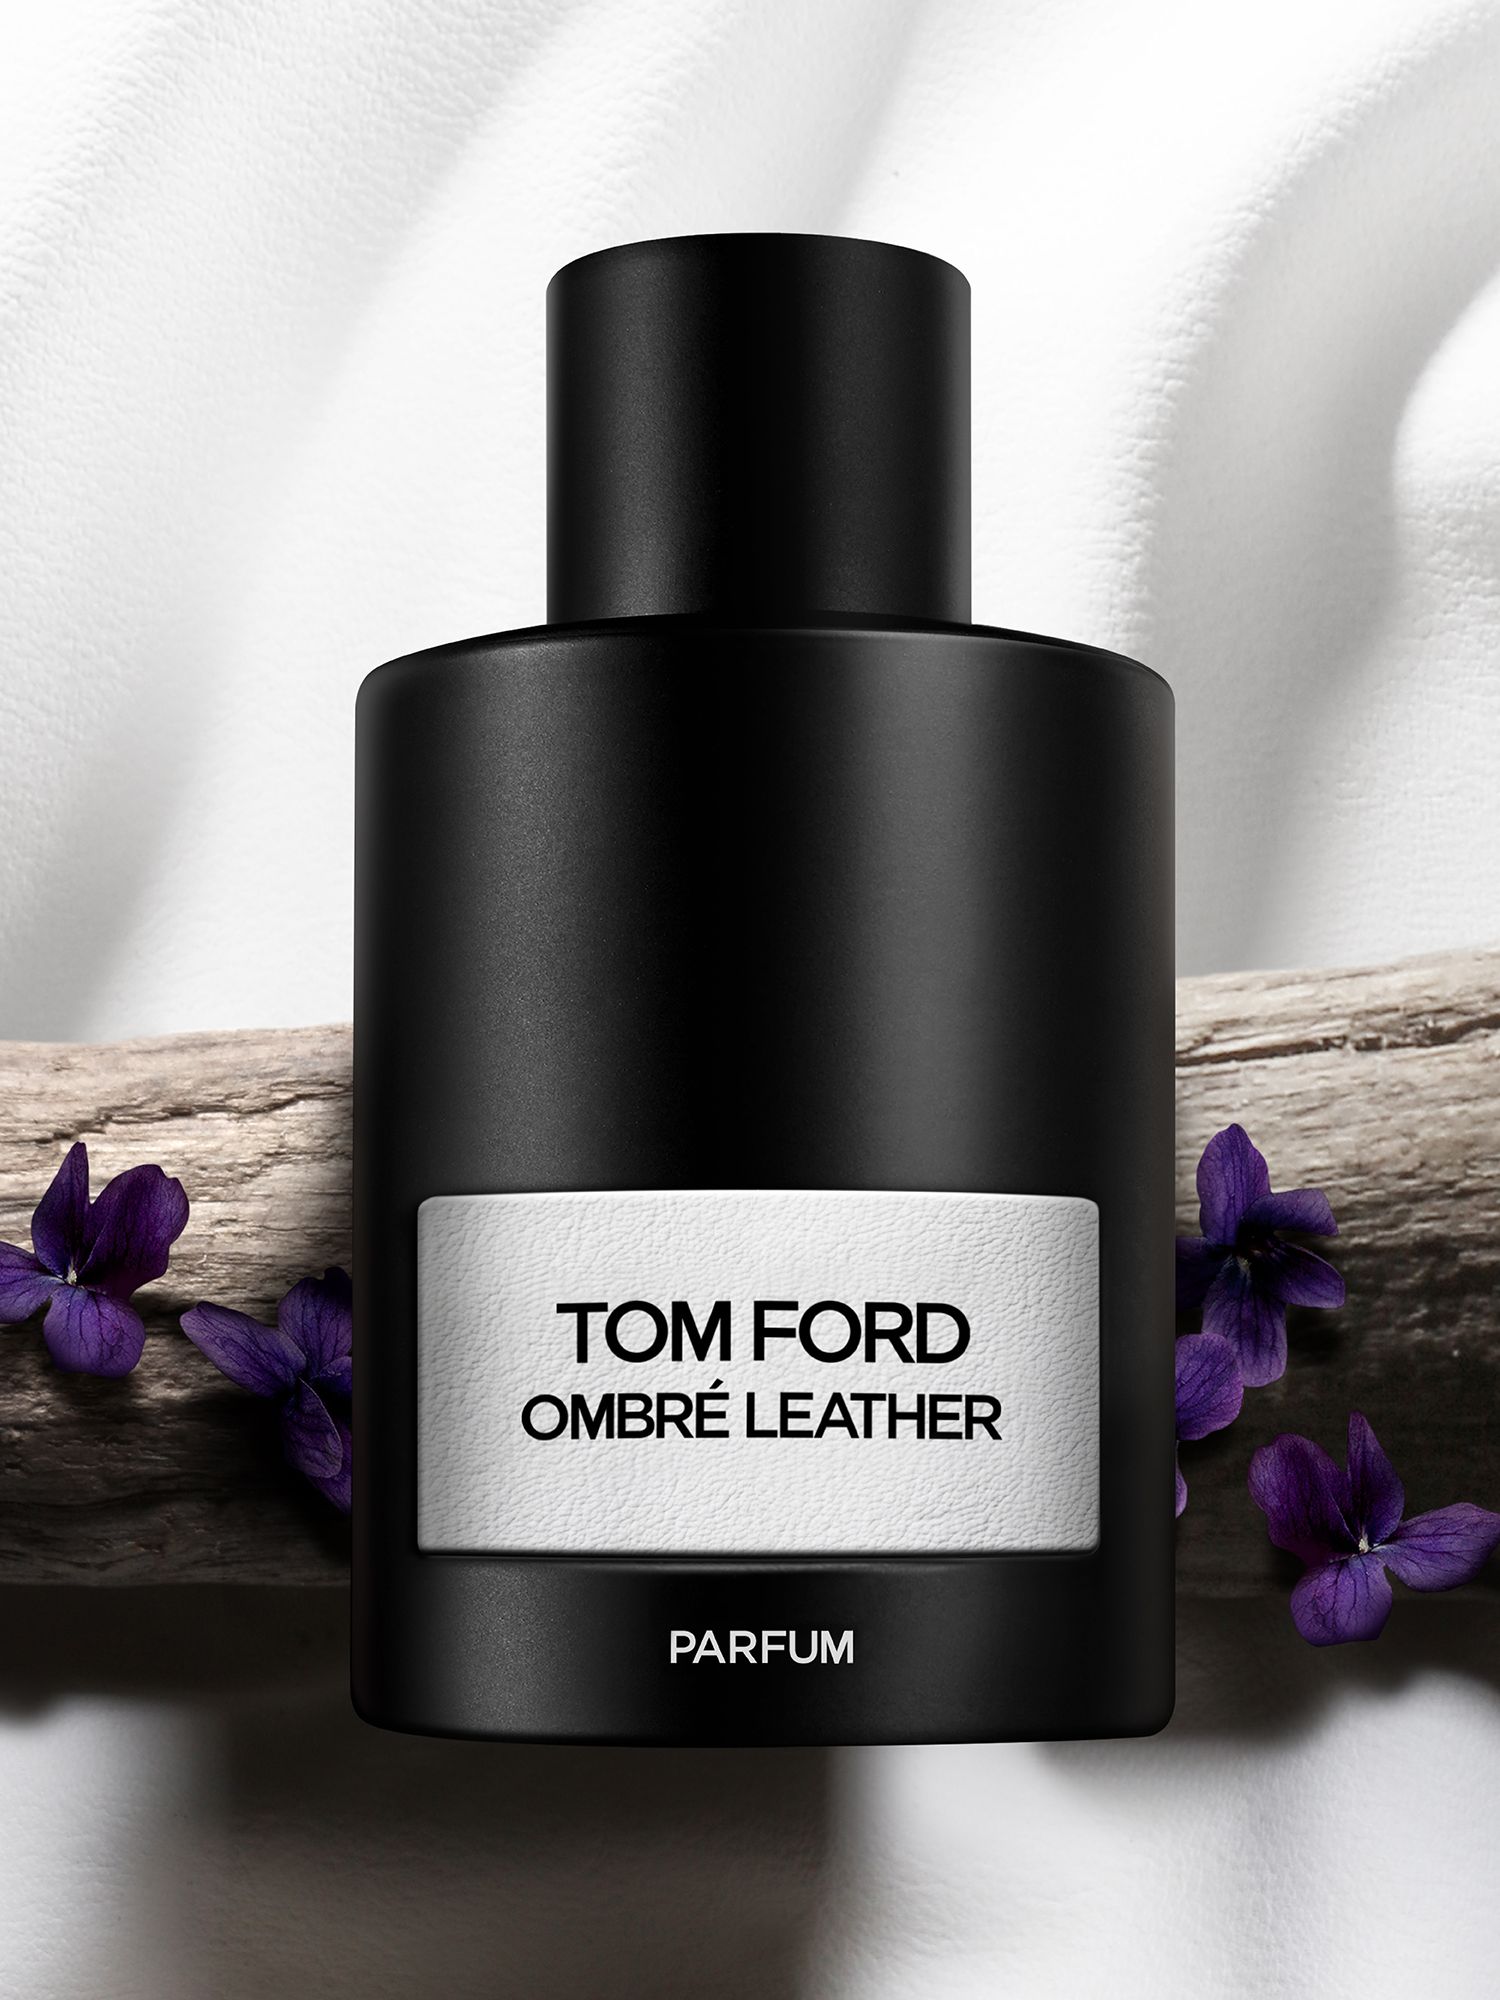 Tom Ford Ombre Leather Perfume by Tom Ford